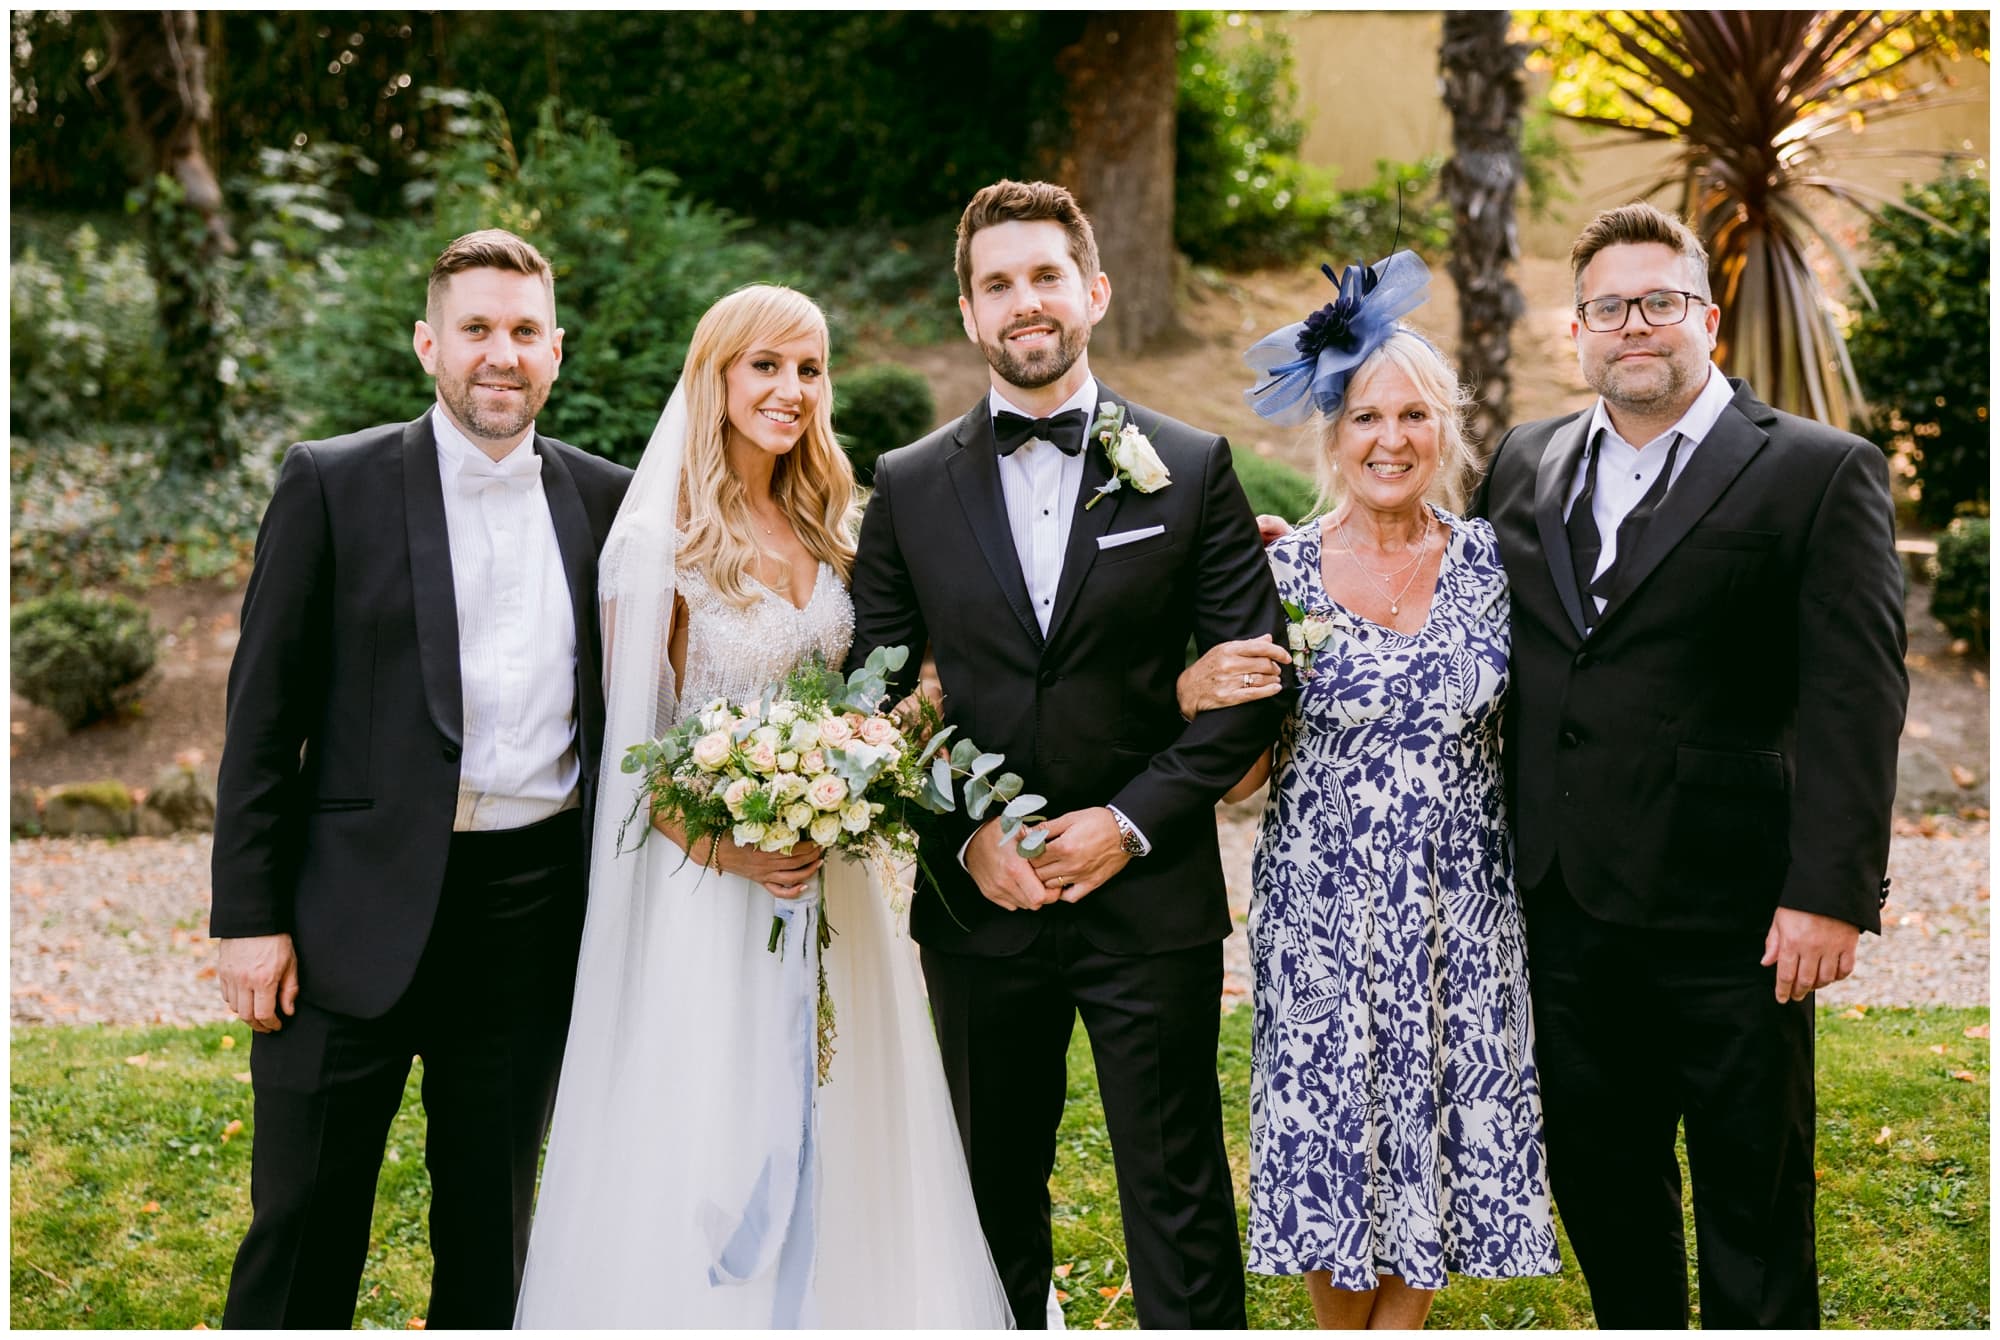 Wedding Photographers in Channel Islands family groom photo.